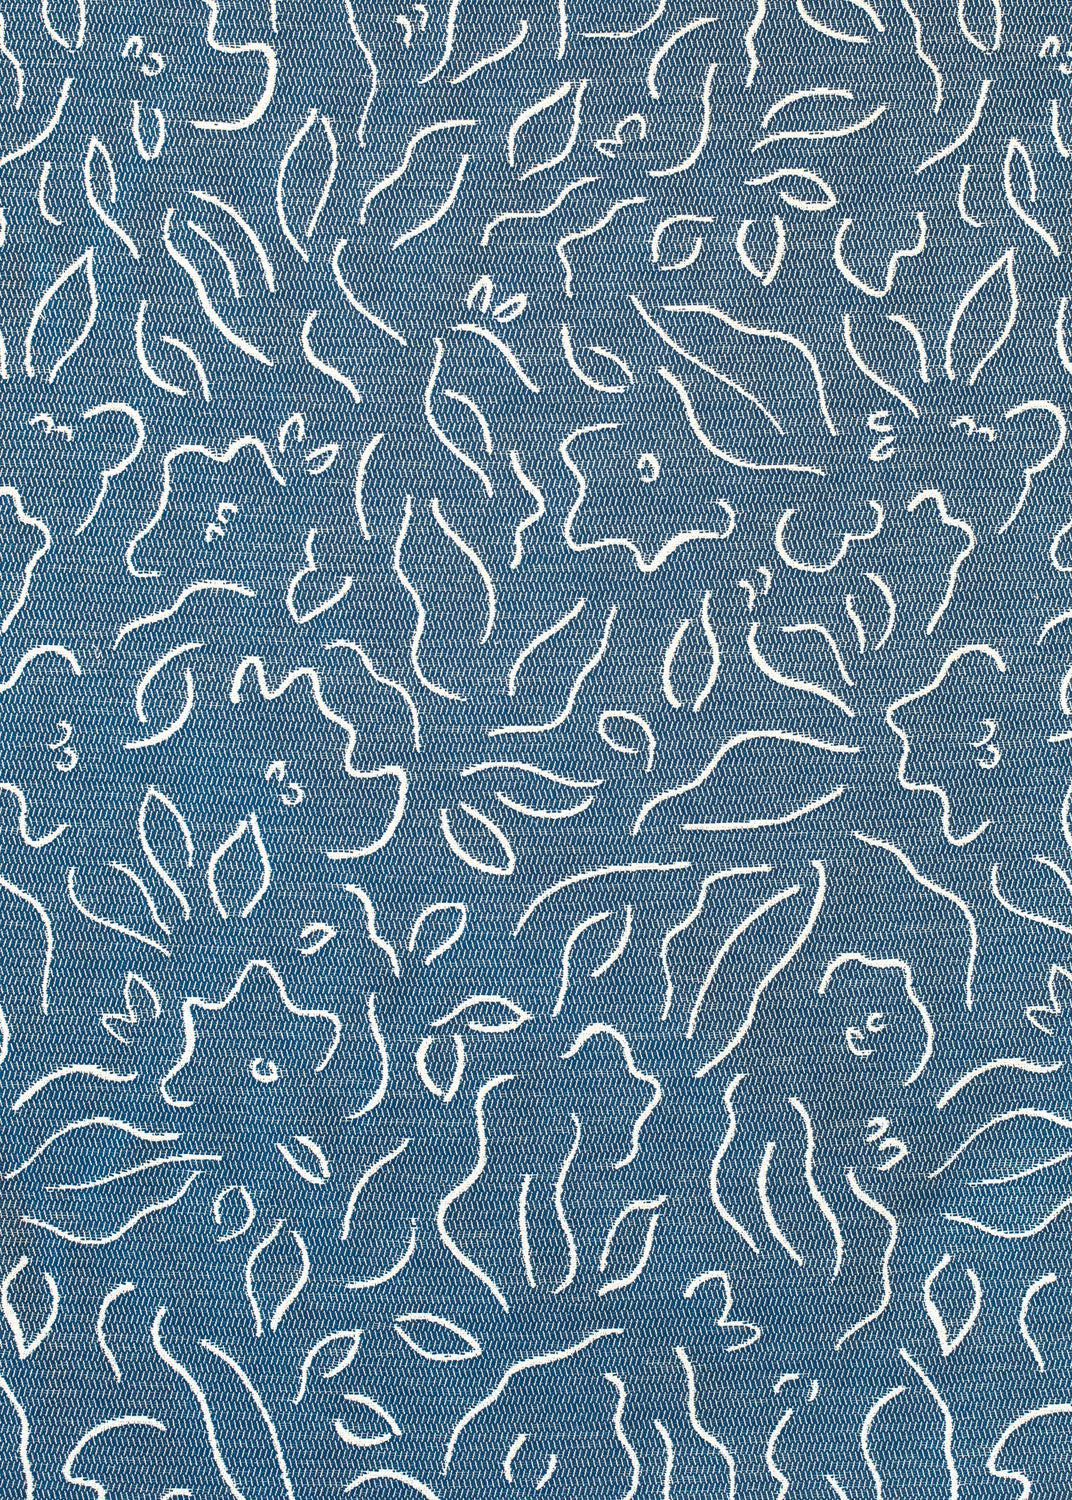 Detail of fabric in a minimalist floral print in cream on a navy field.